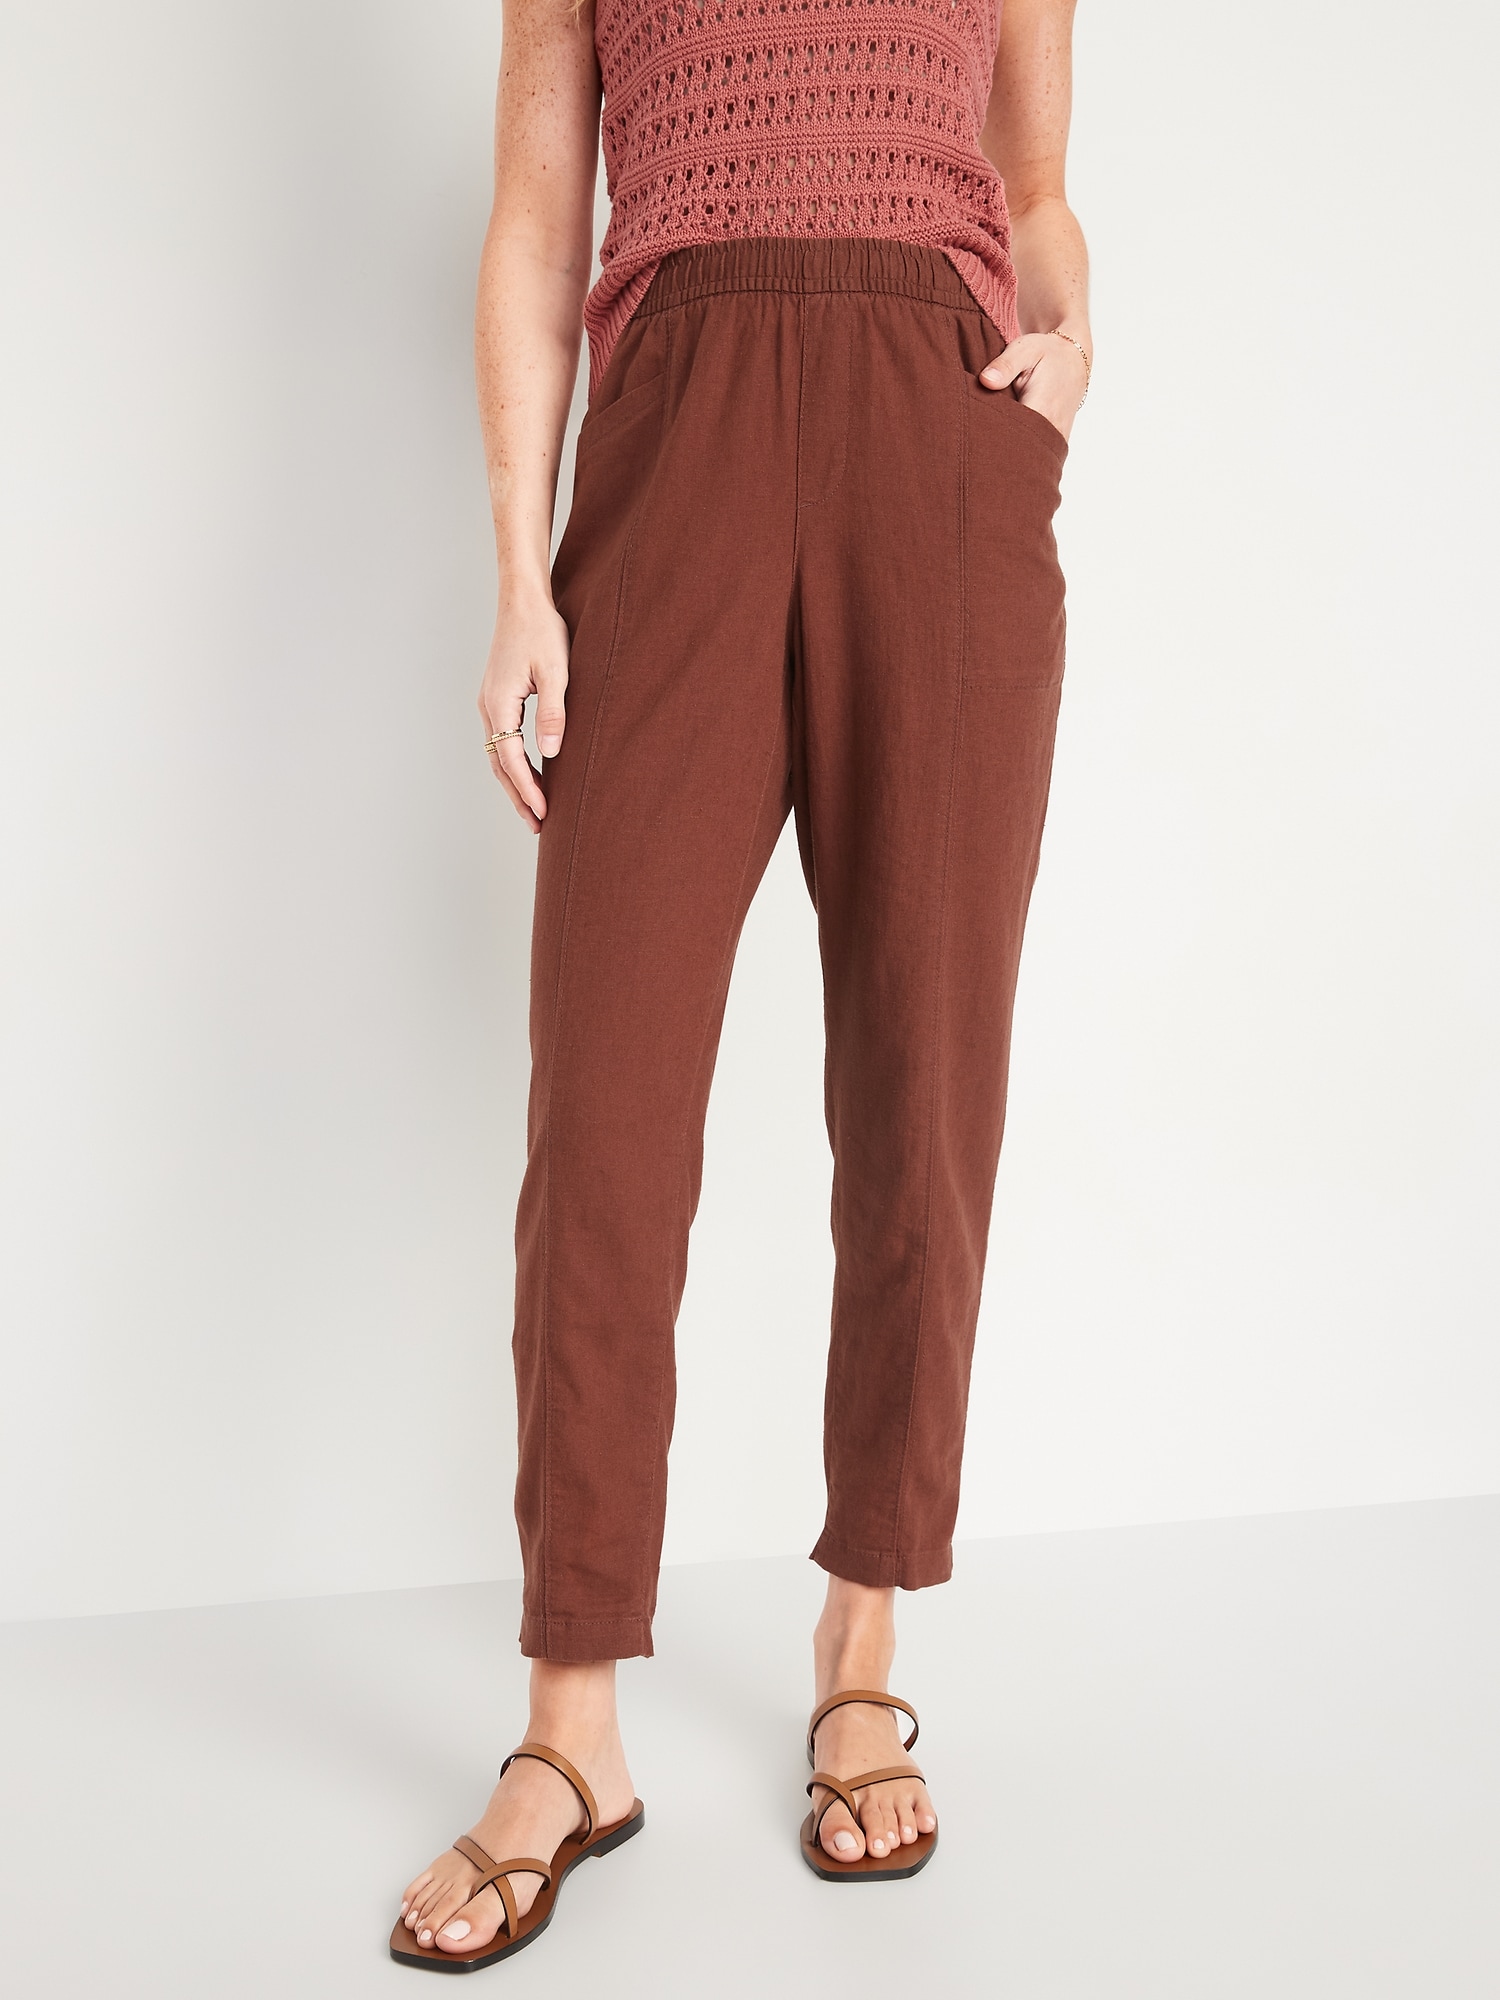 High Waisted Cropped Linen Blend Pants For Women Old Navy